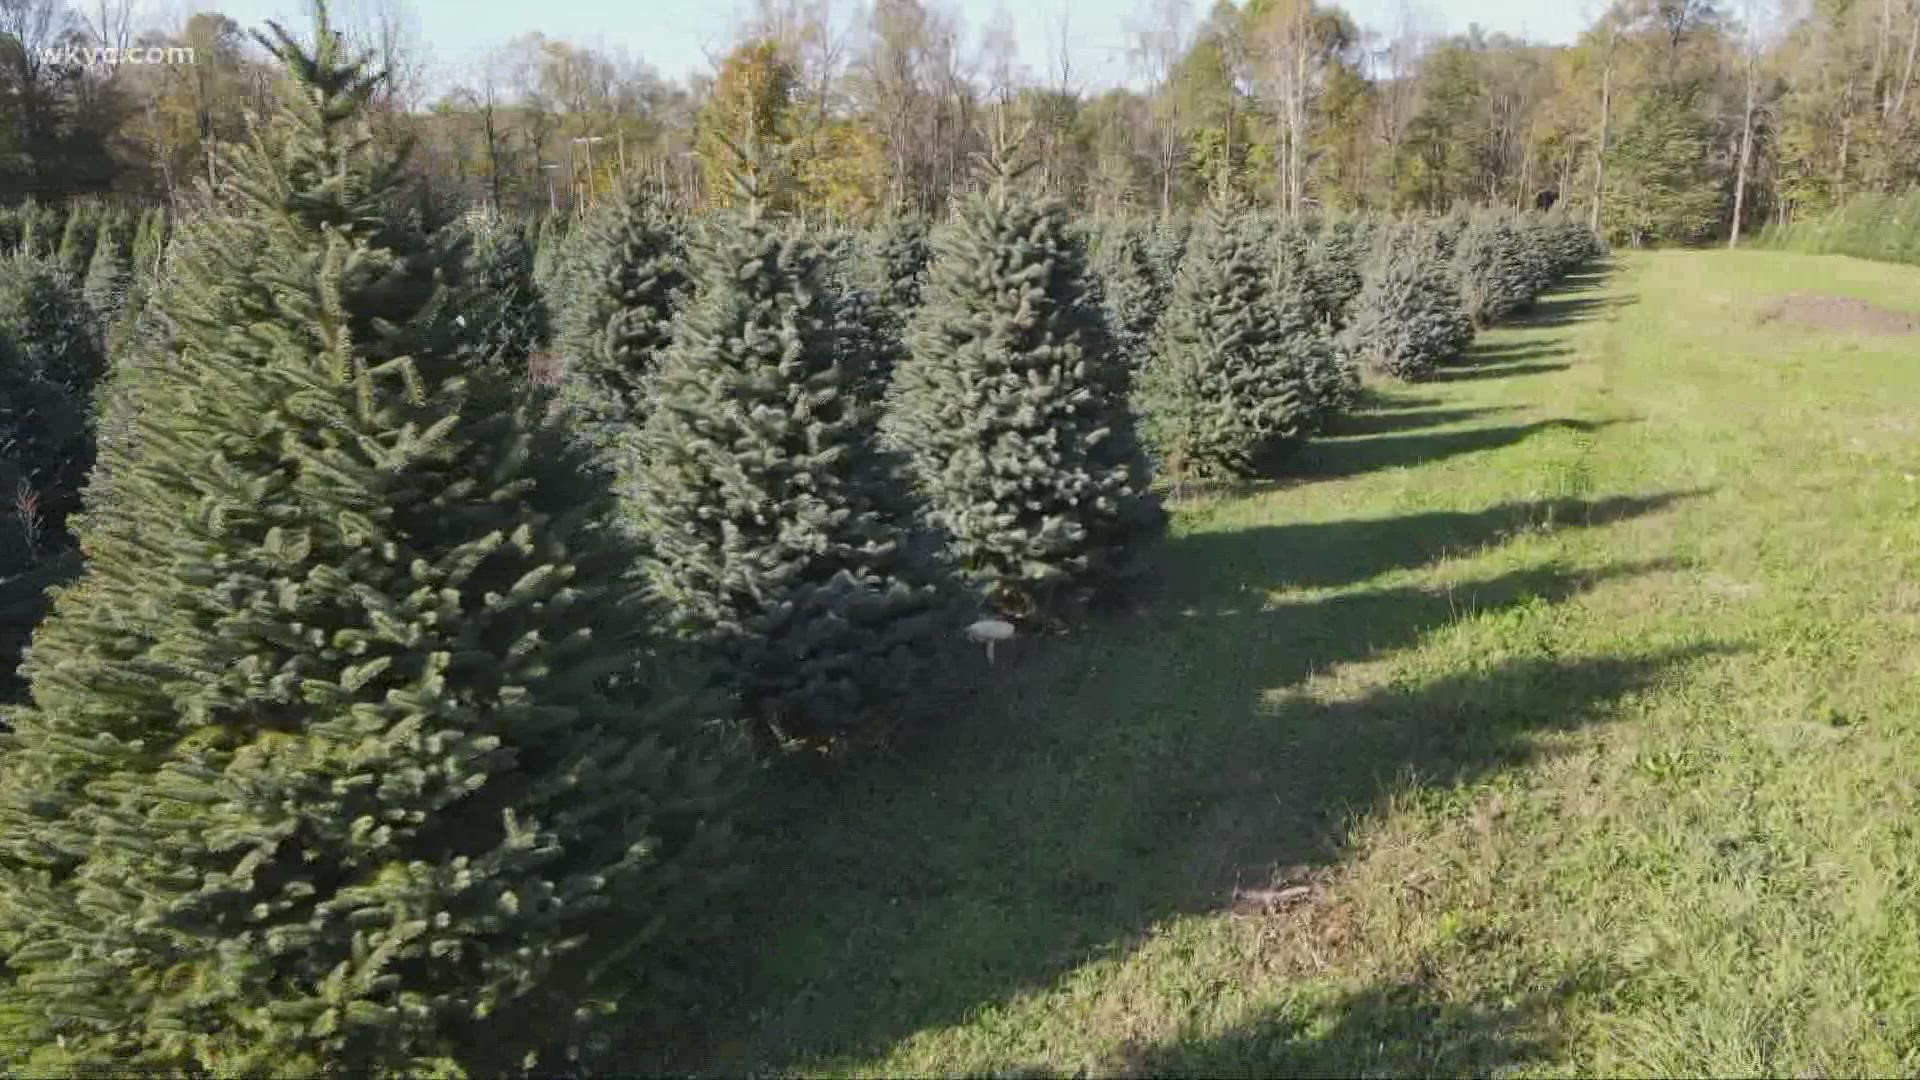 Christmas is just a few weeks away, so we decided to check in with some tree farms to see what's happening as they prepare for the holiday season.